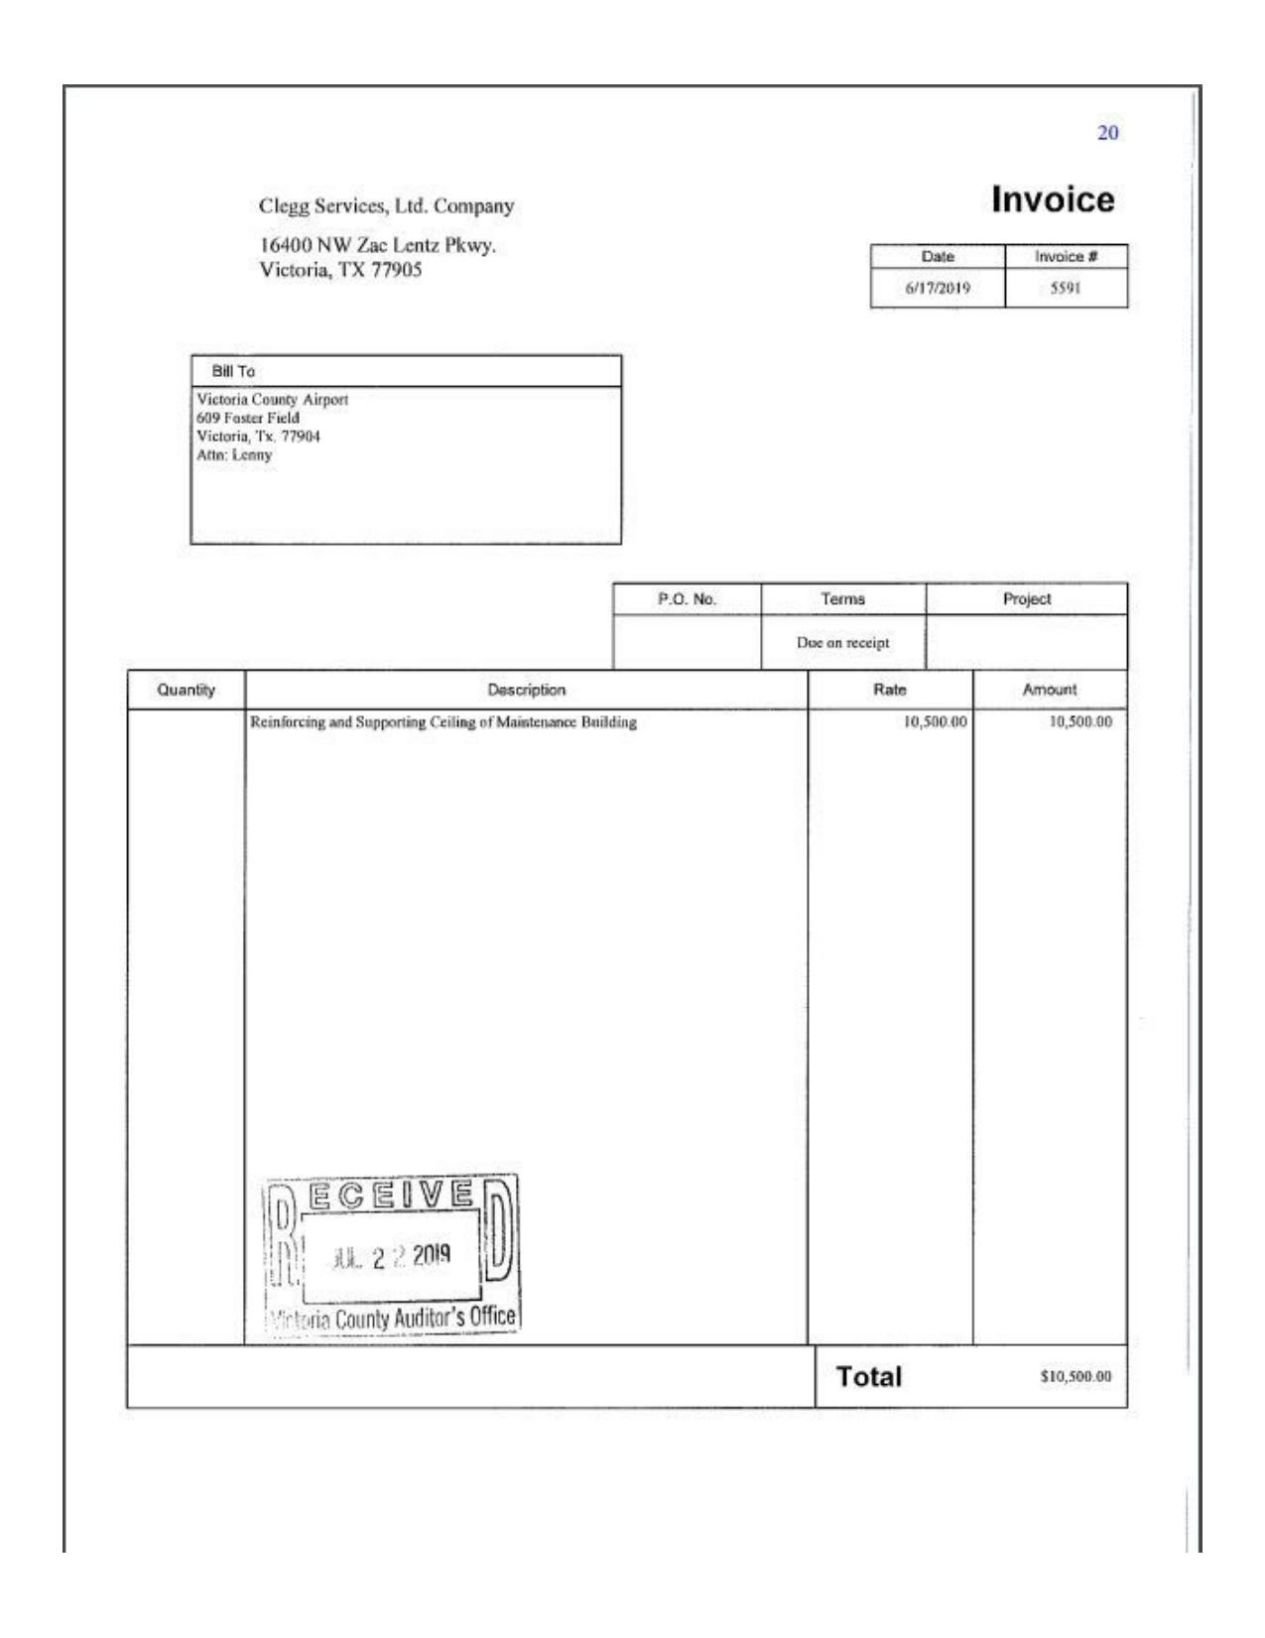 sample invoices of trustees